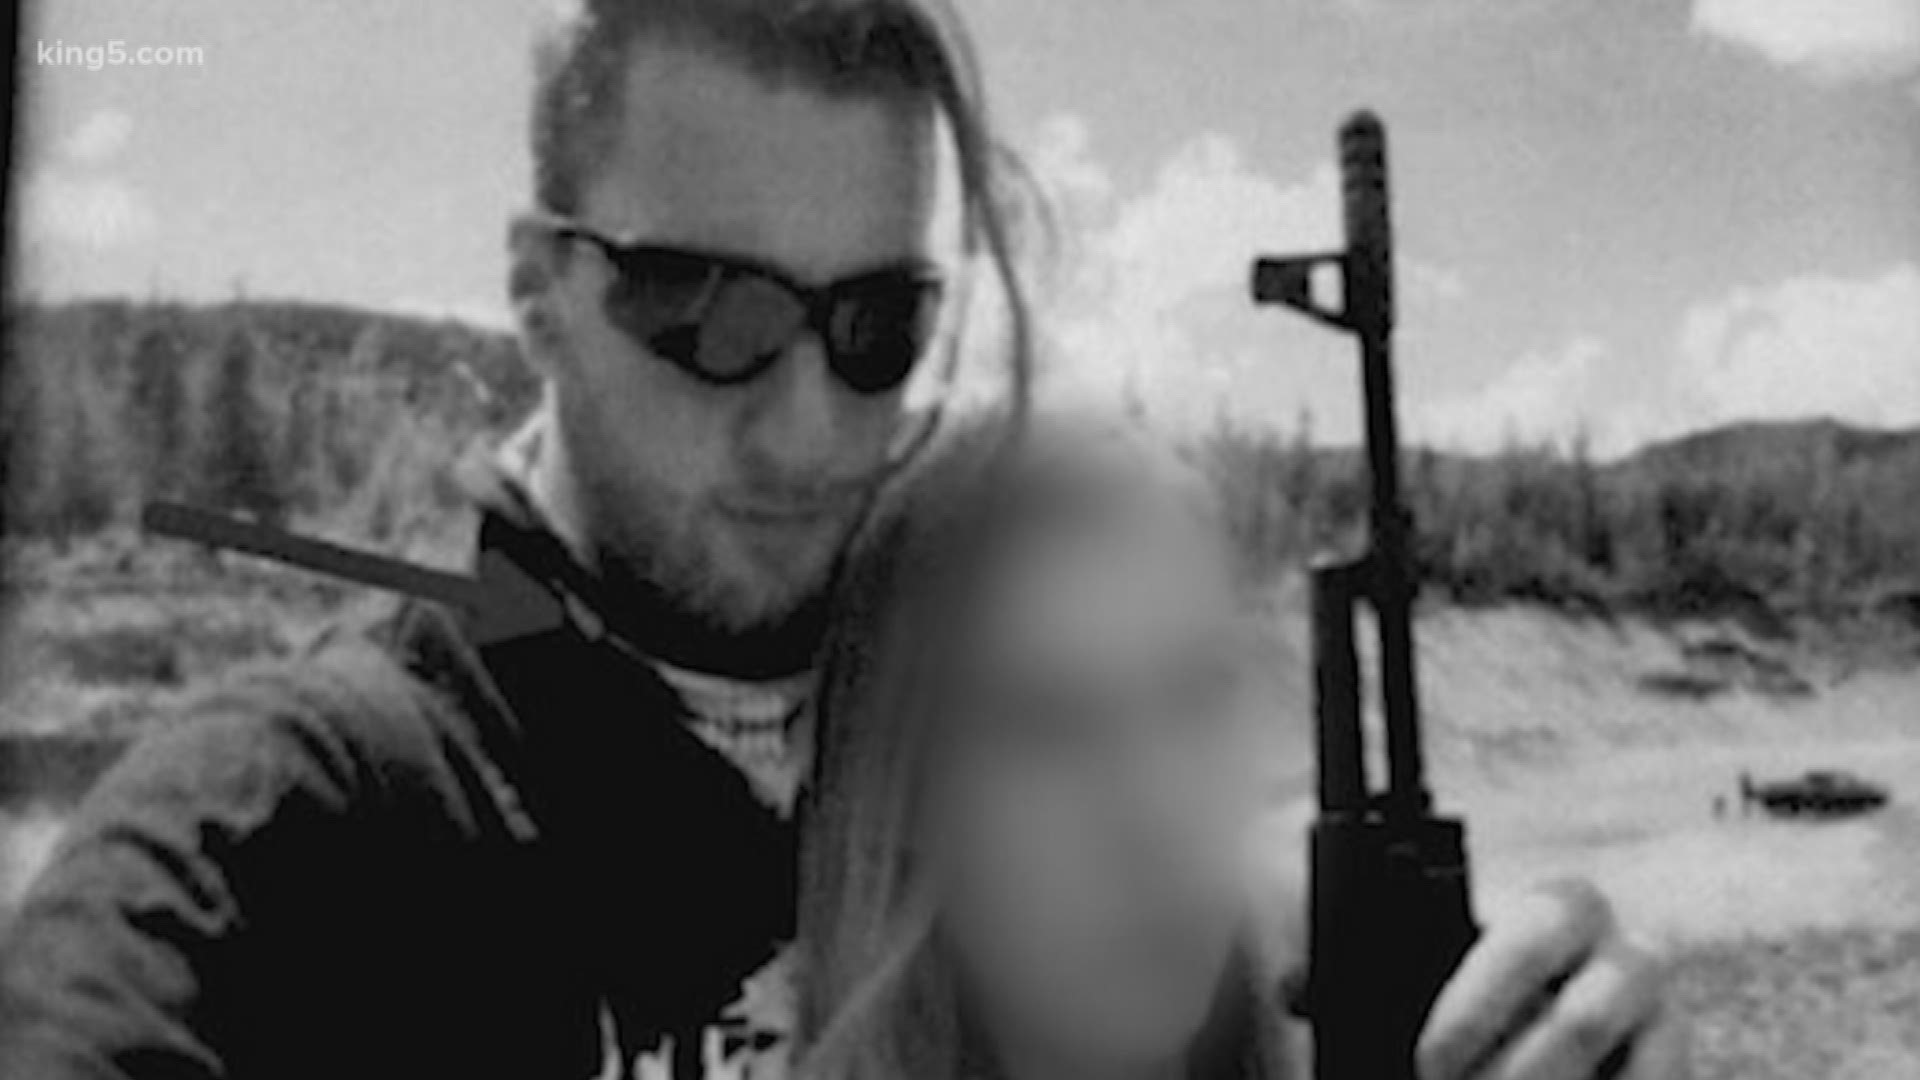 According to court documents, Kaleb Cole is the leader of a small, but dangerous white supremacist group called "Atomwaffen."